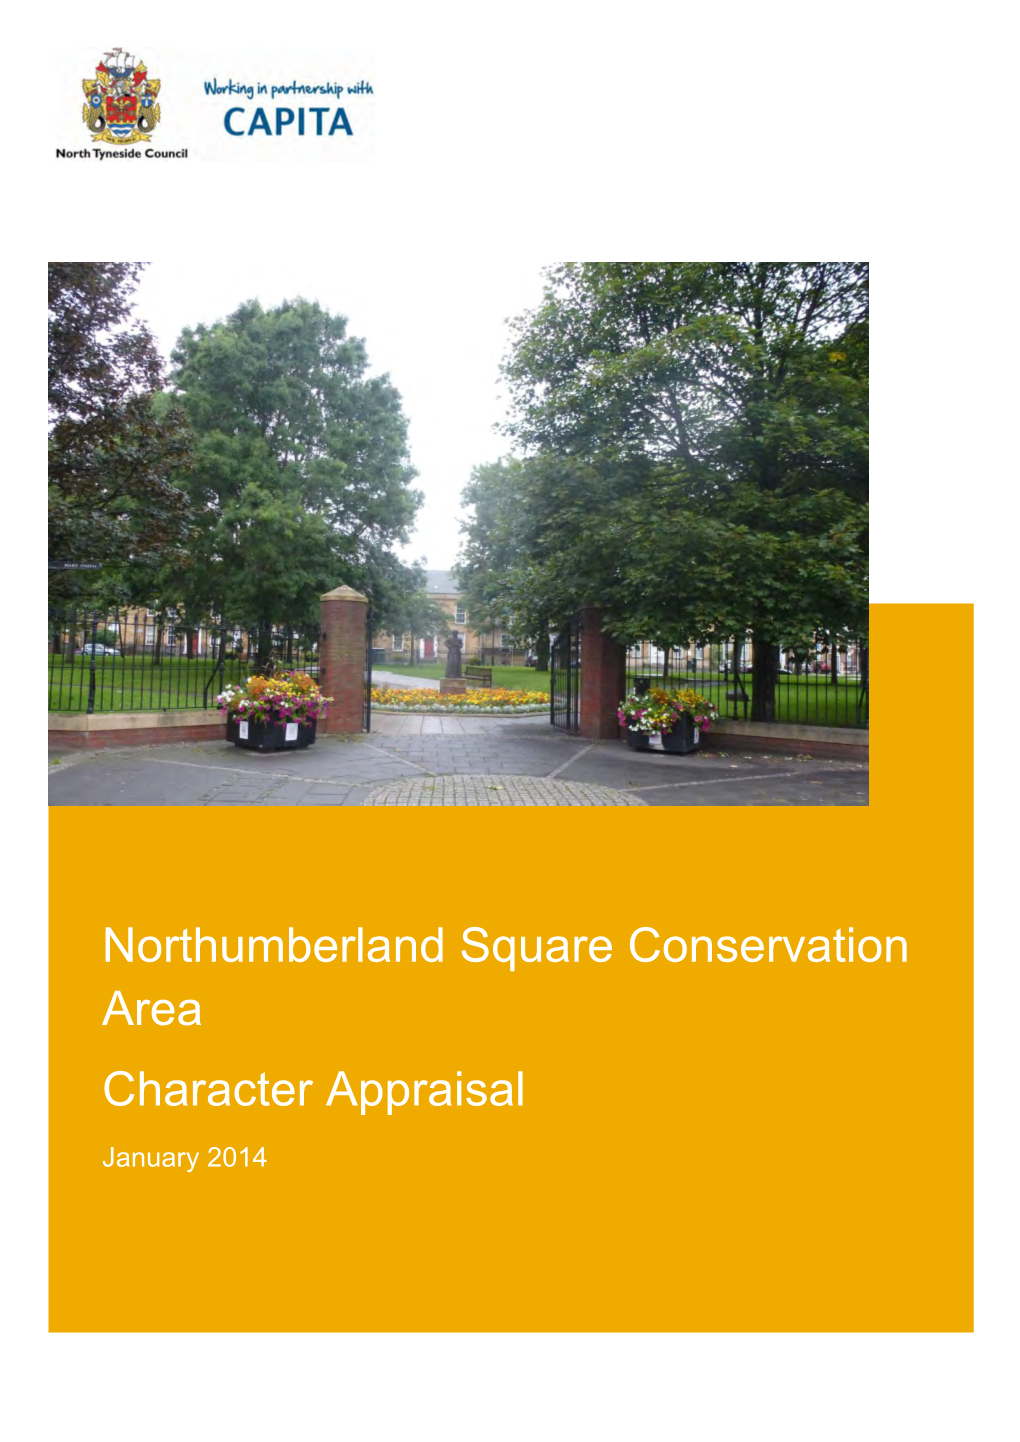 Northumberland Square Conservation Area Character Appraisal